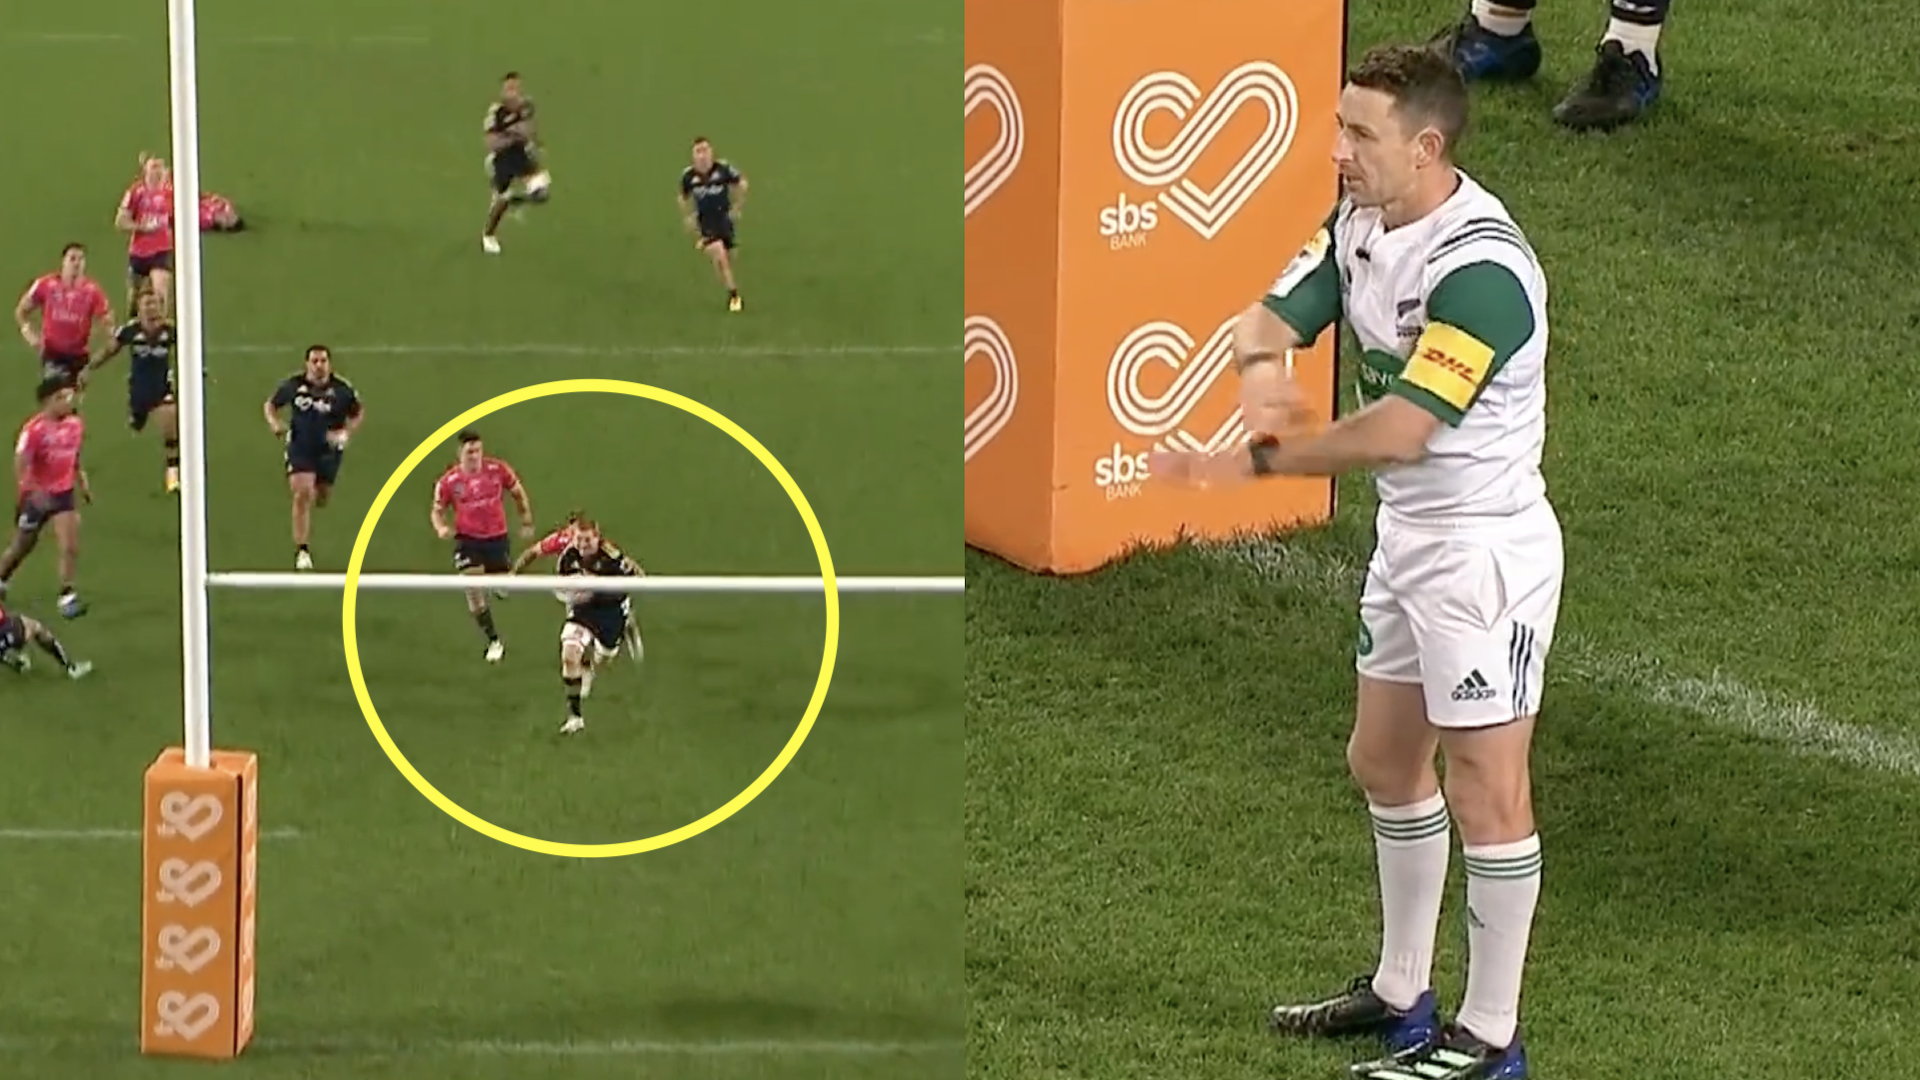 'Out of this world': Wallaby fullback manhandles 101kg flanker to save try